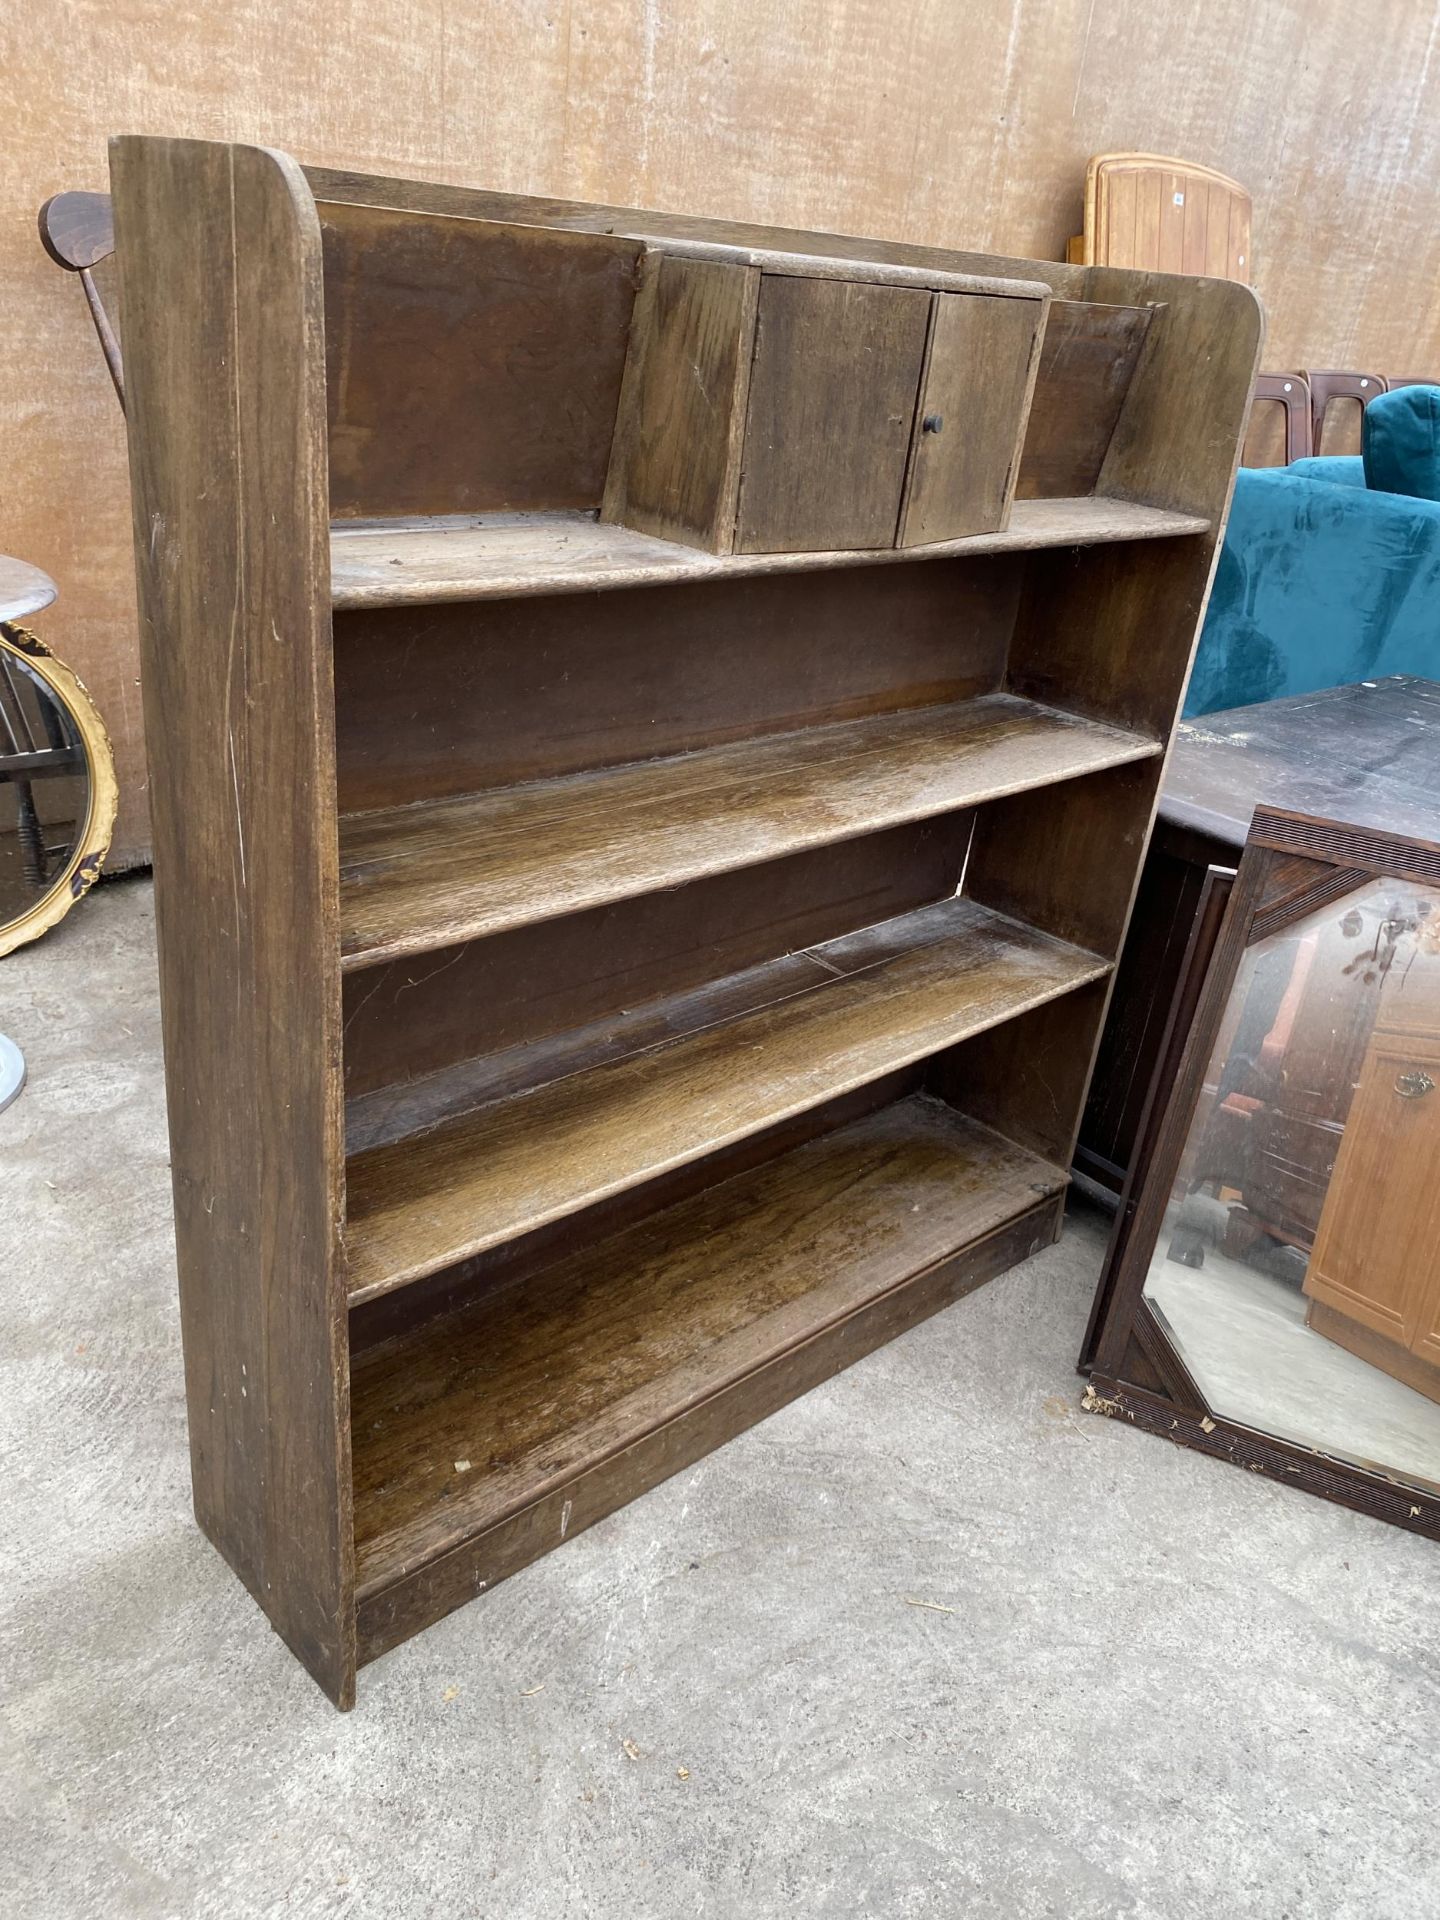 MID 20TH CENTURY OAK OPEN DISPLAY SHELVES ENCLOSING TWO DOORS, COMPLETE WITH TWO MIRRORS - Image 2 of 2